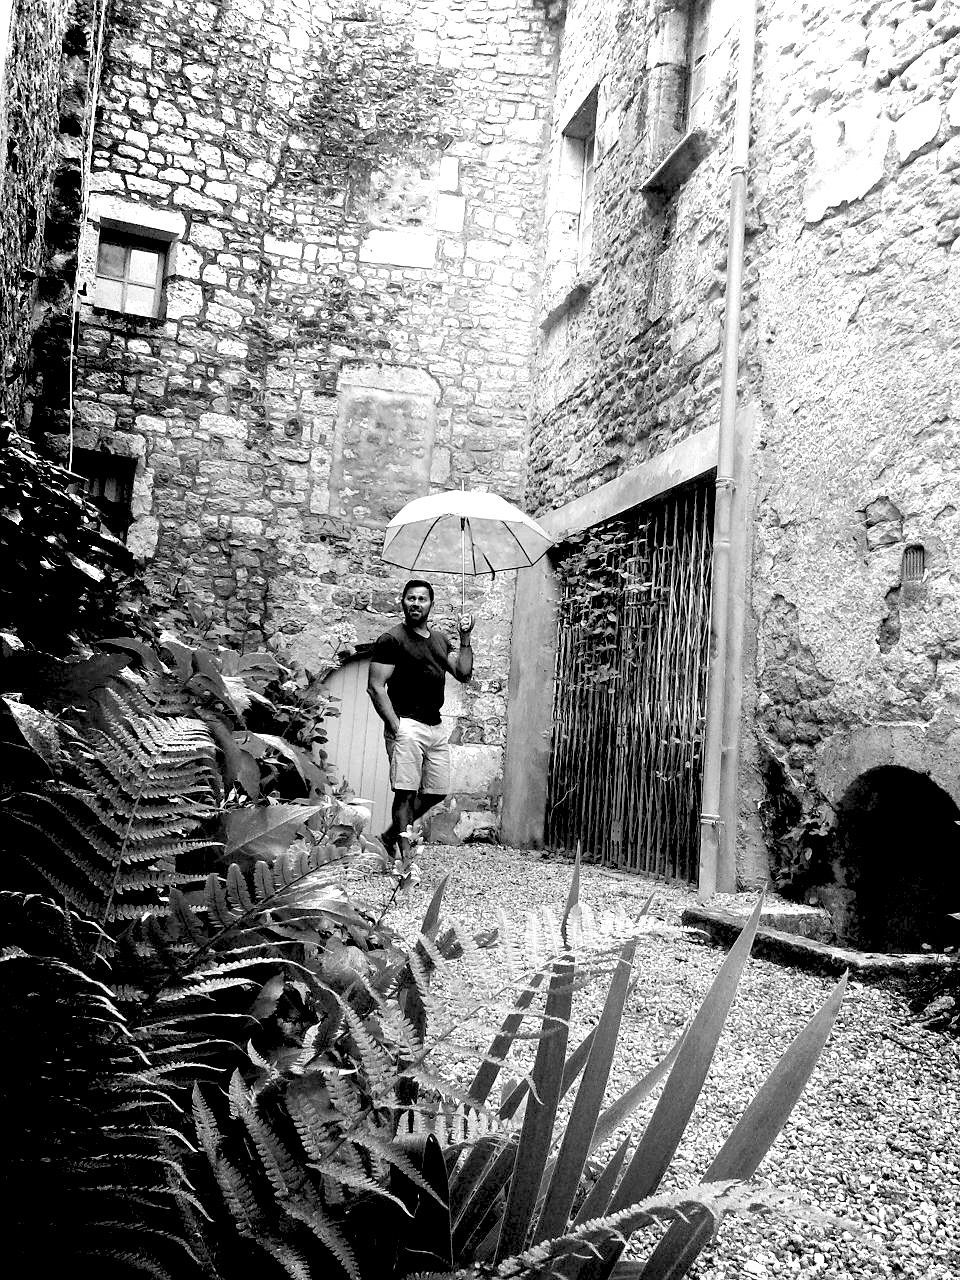 Man with umbrella standing in narrow alley